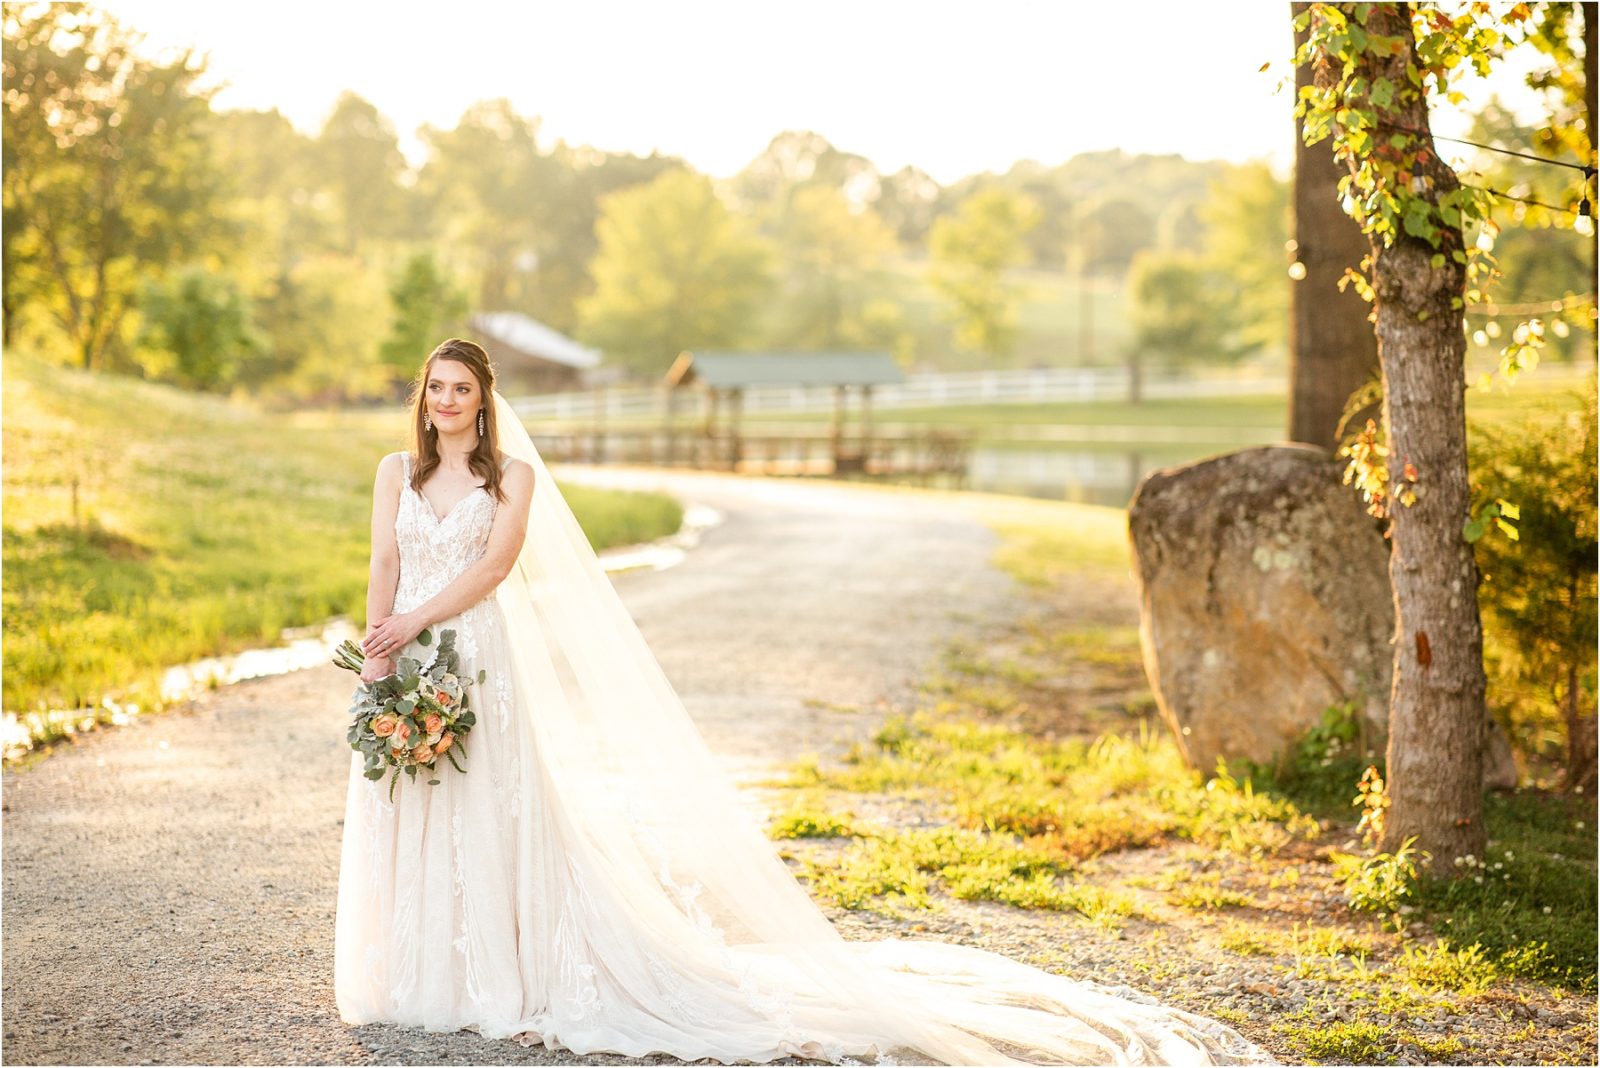 Woman in wedding dress standing on pathway on farm